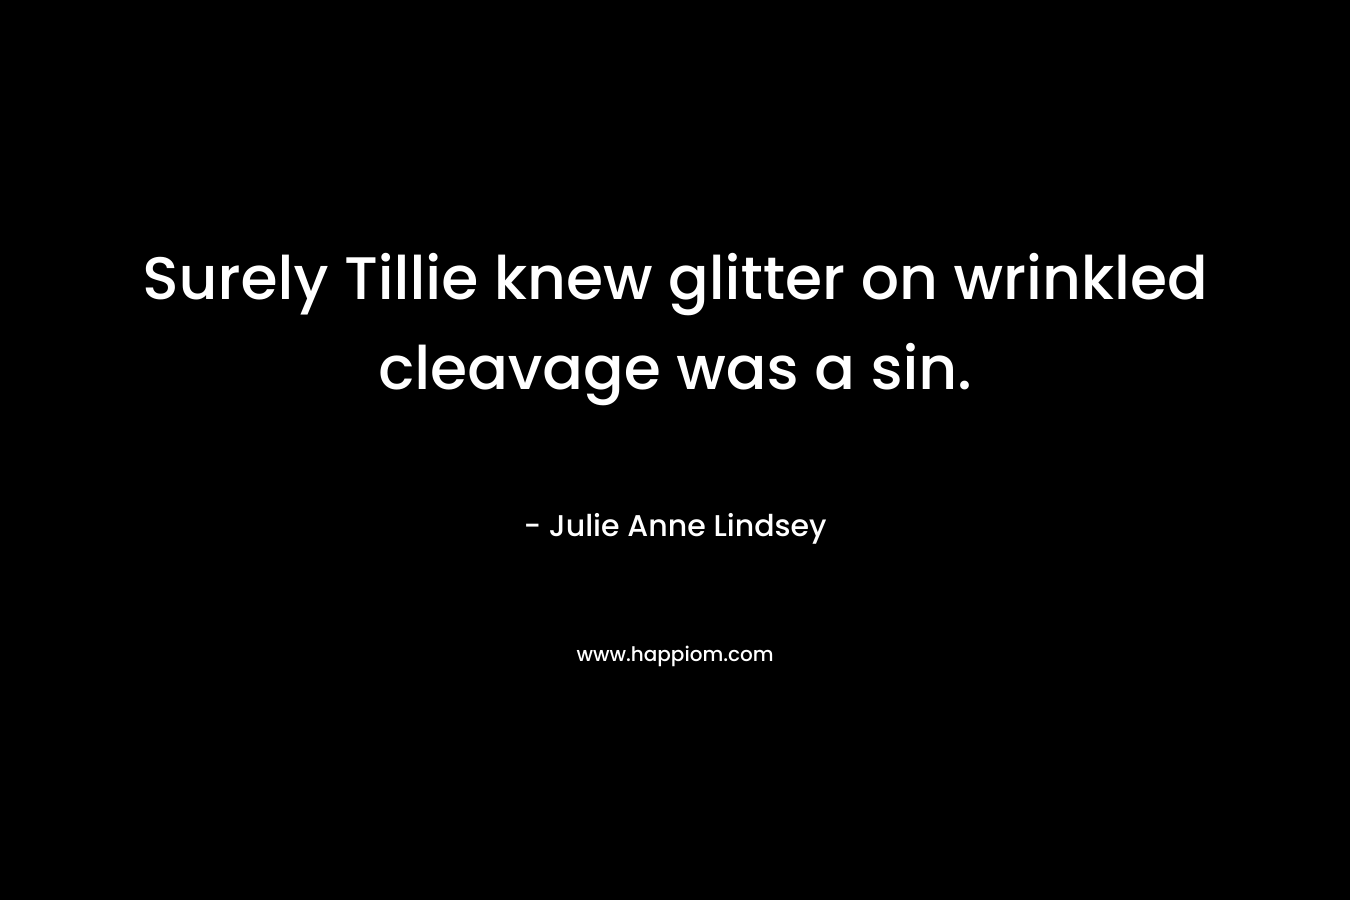 Surely Tillie knew glitter on wrinkled cleavage was a sin.